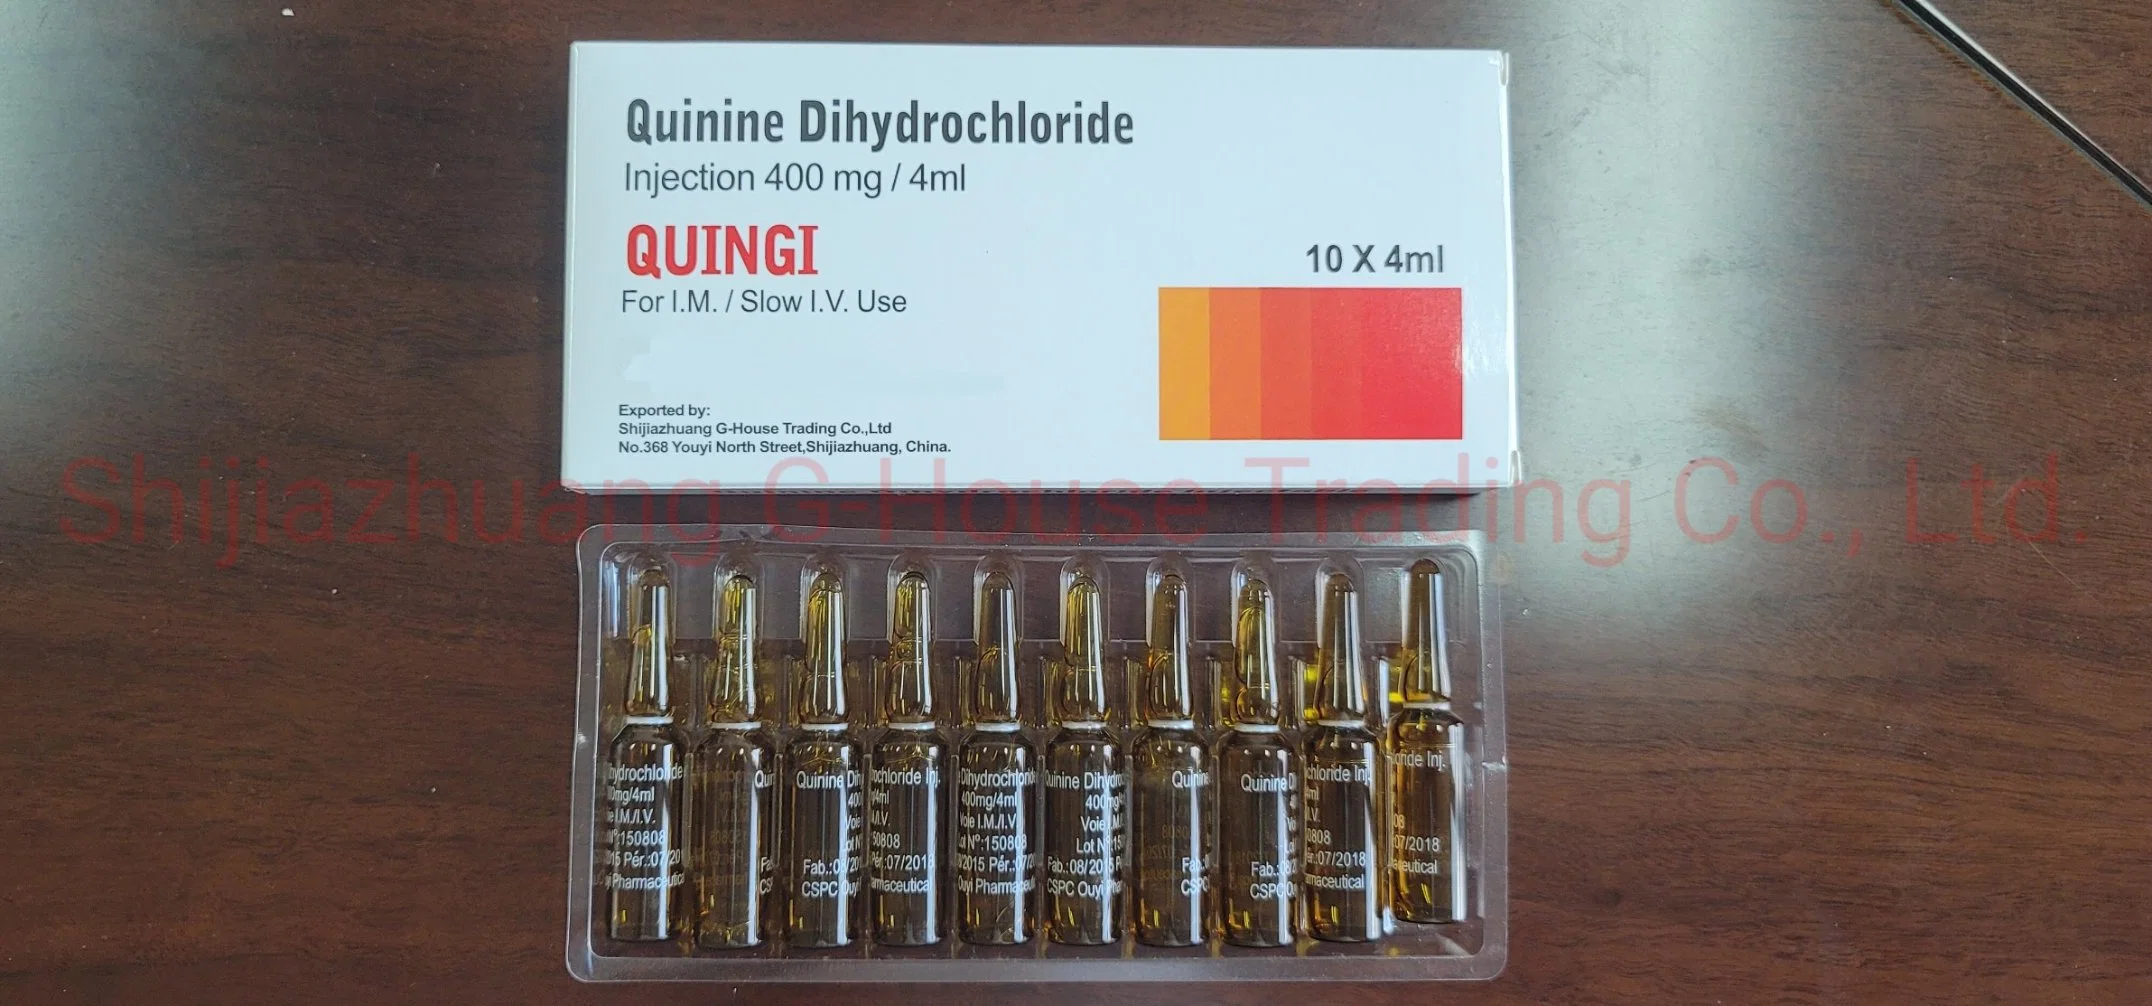 Dichlorhydrate de quinine injection 400mg/4ml pharmaceutique